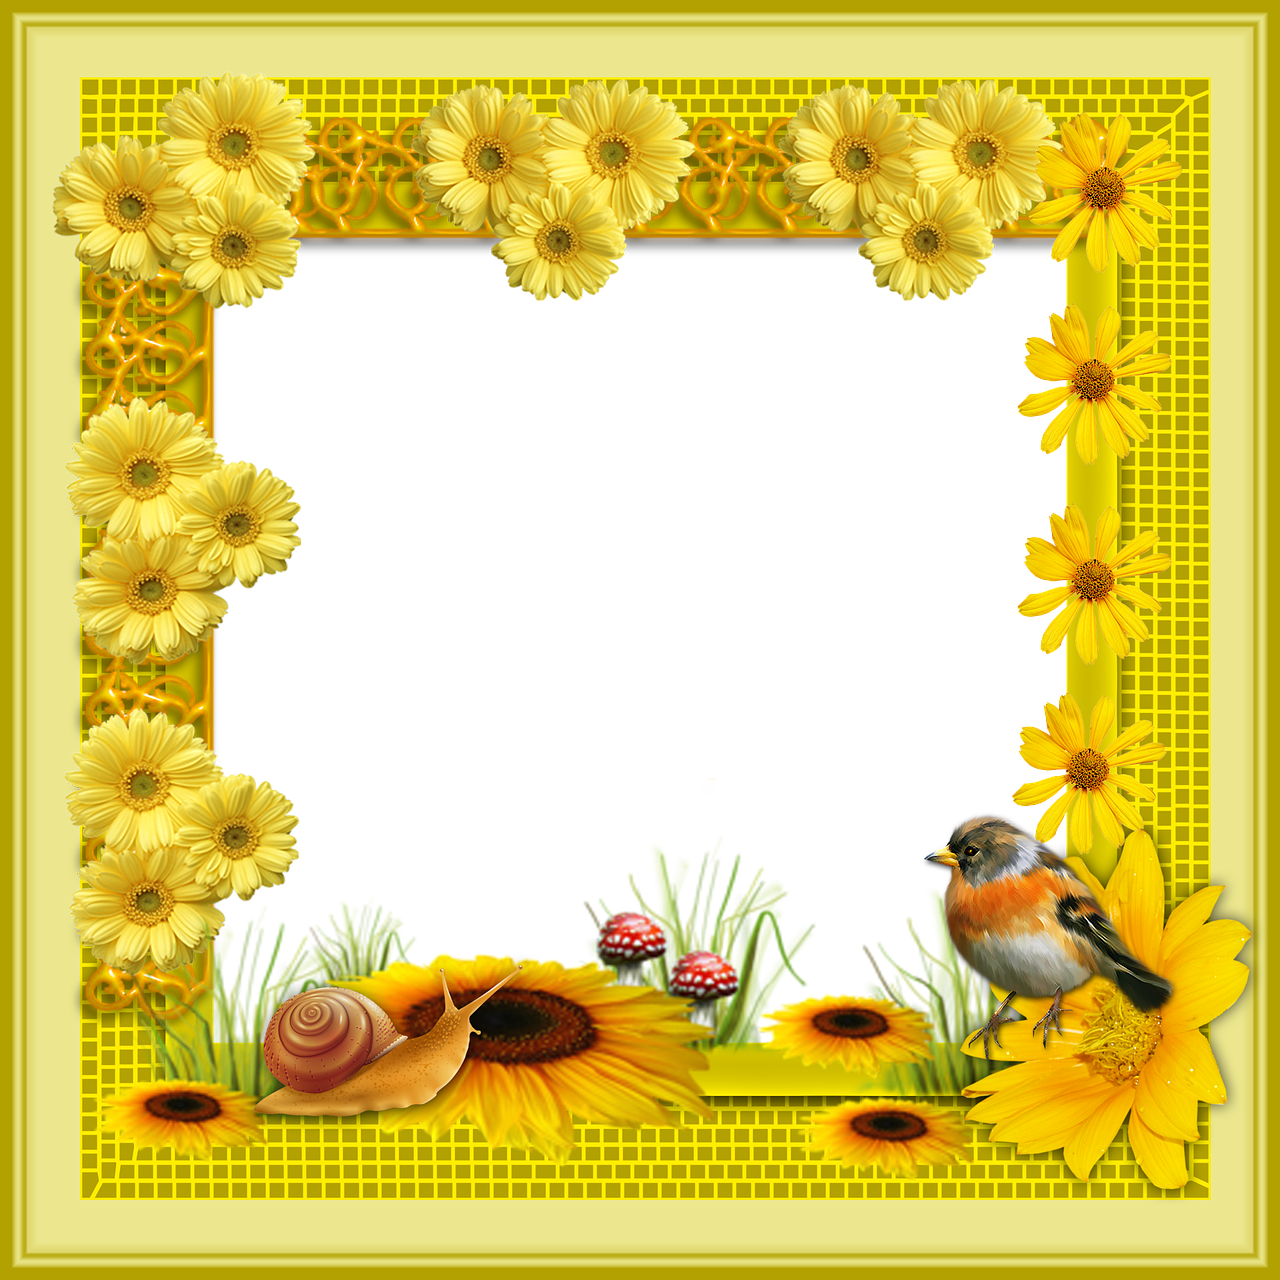 Frame Flowers Sunflower HD Image Free PNG Image